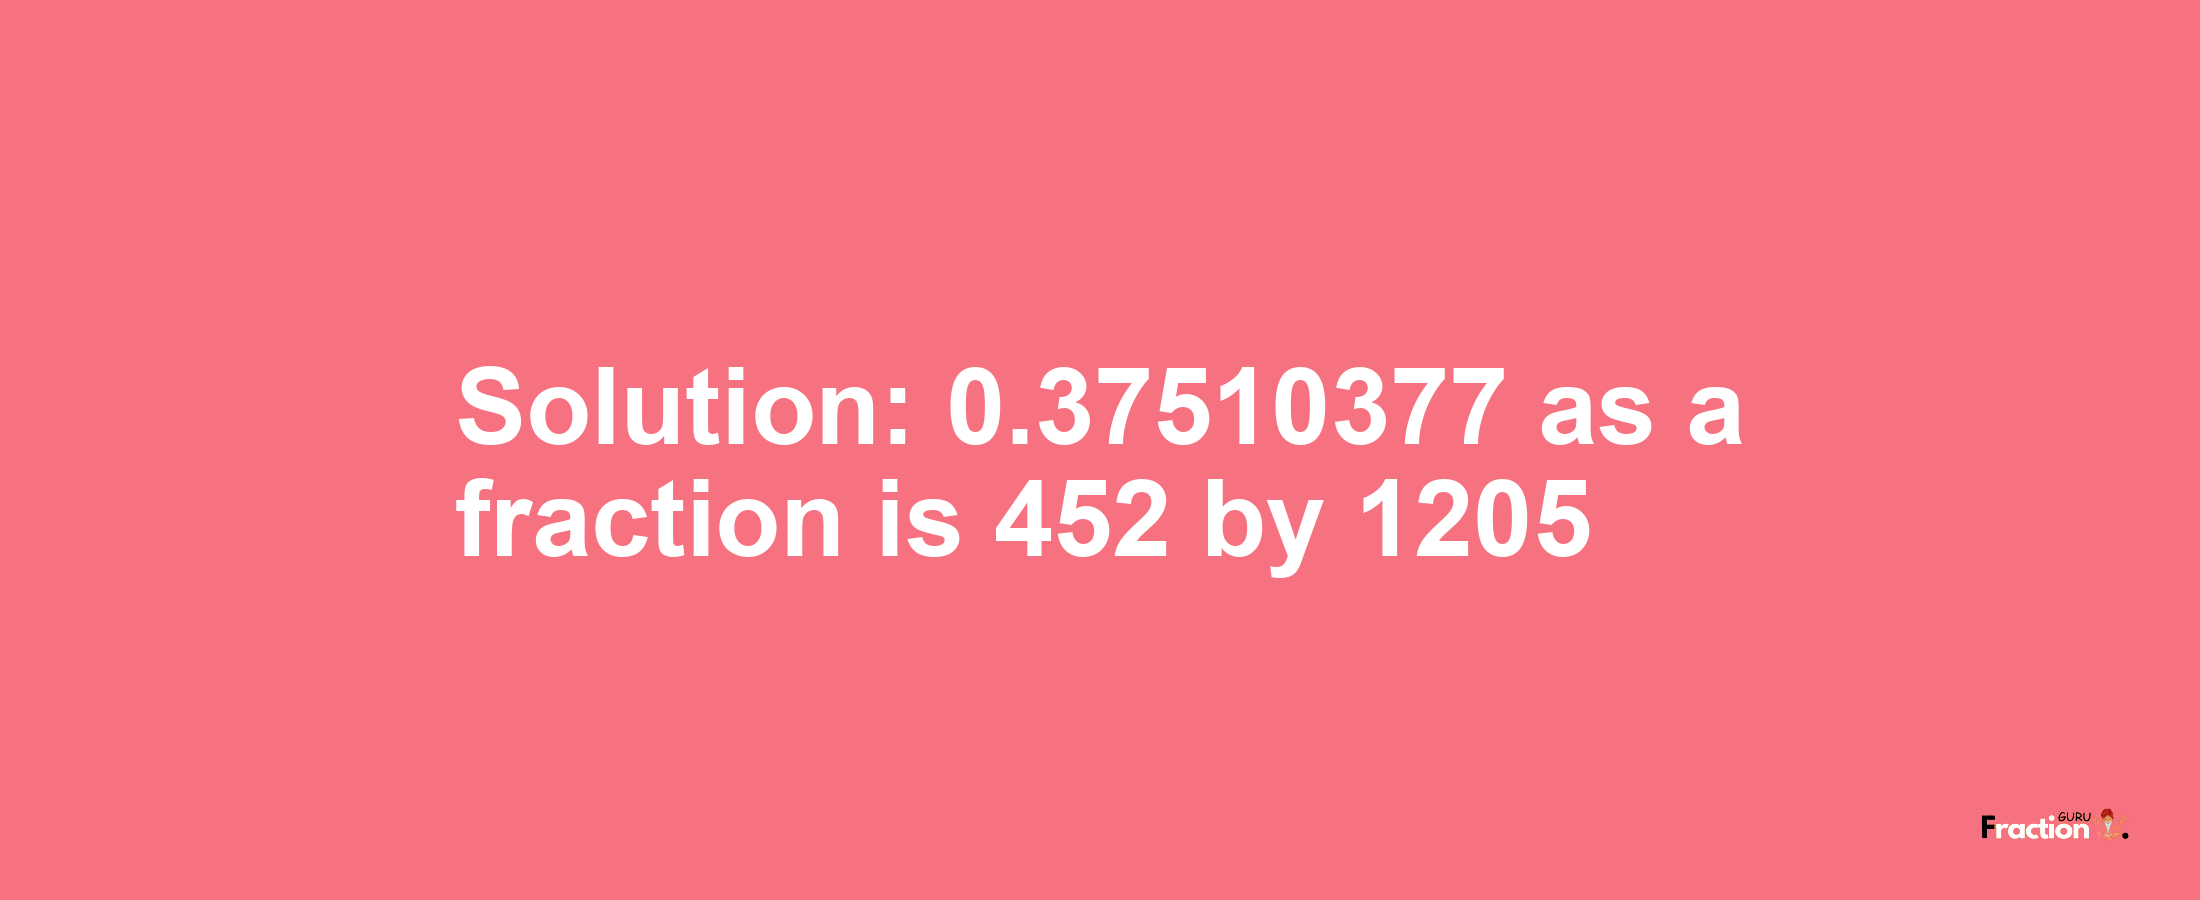 Solution:0.37510377 as a fraction is 452/1205